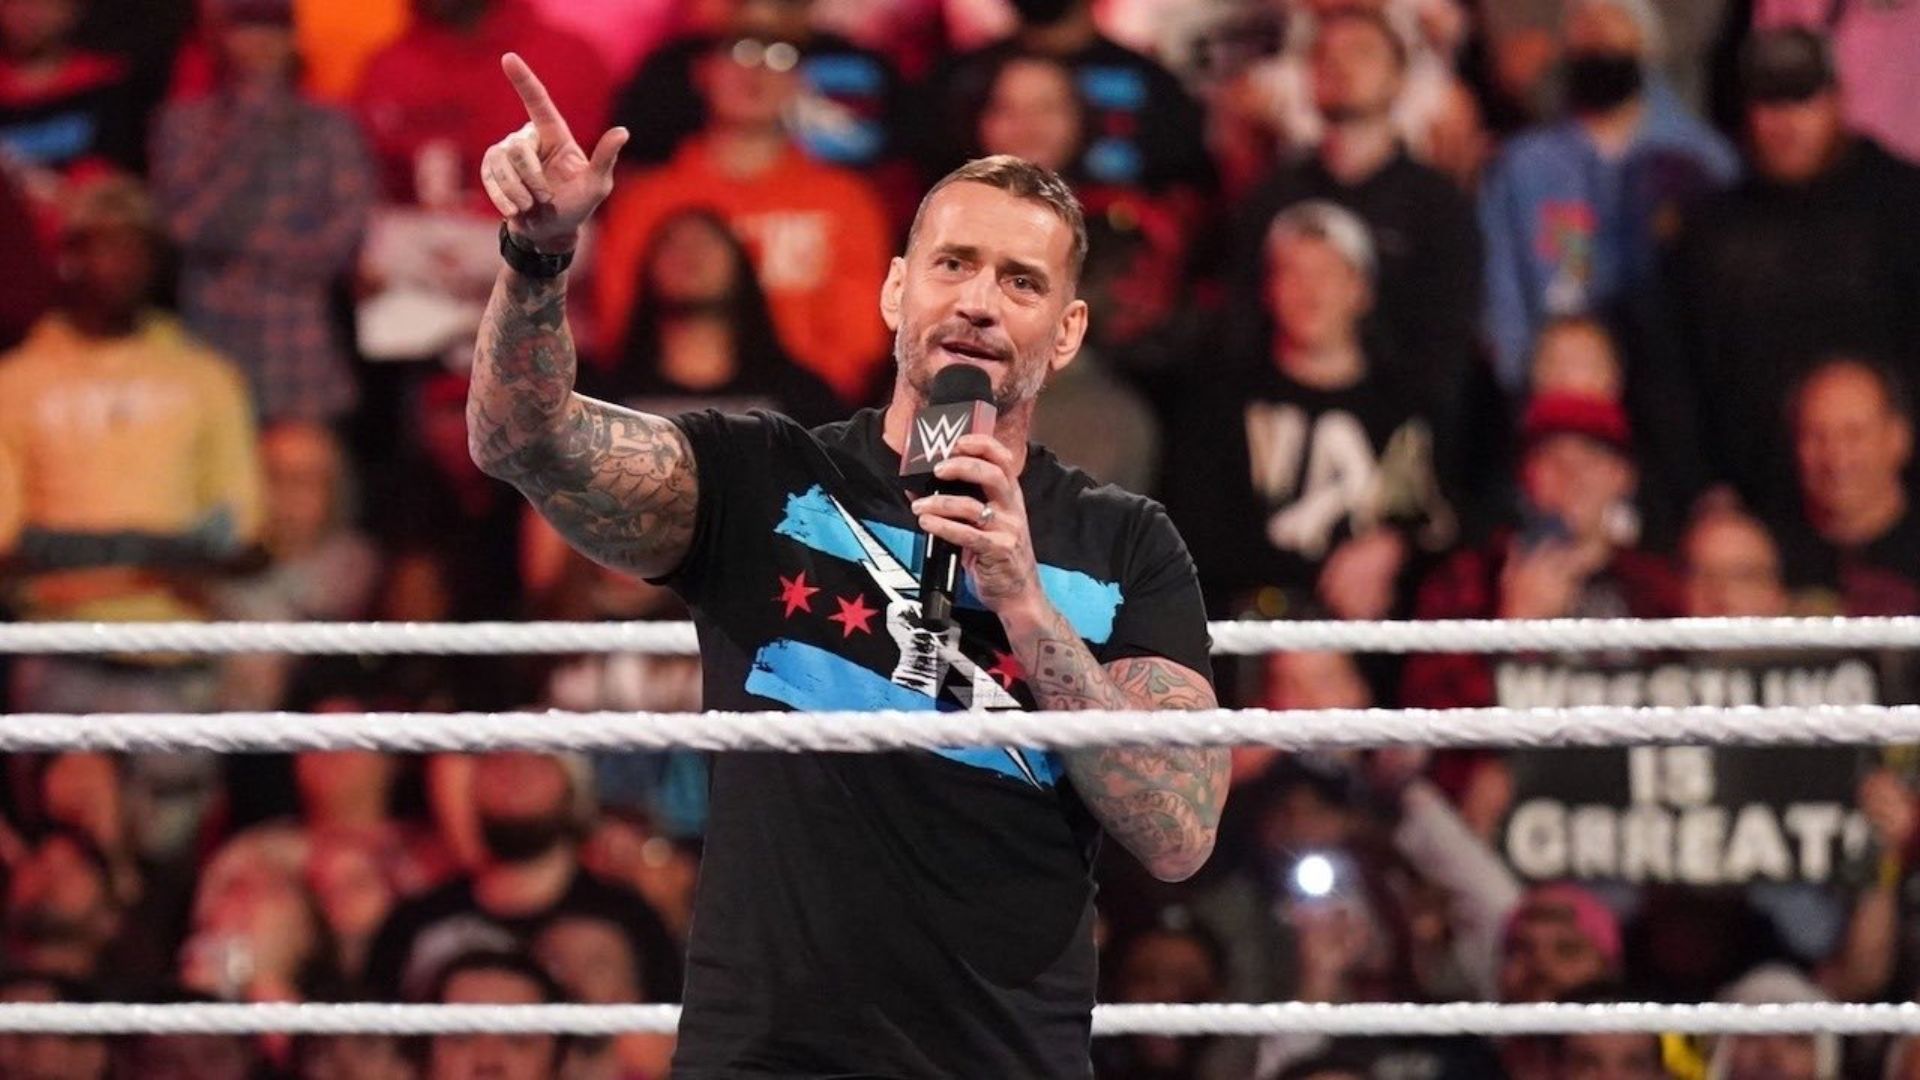 CM Punk has signed with WWE RAW.